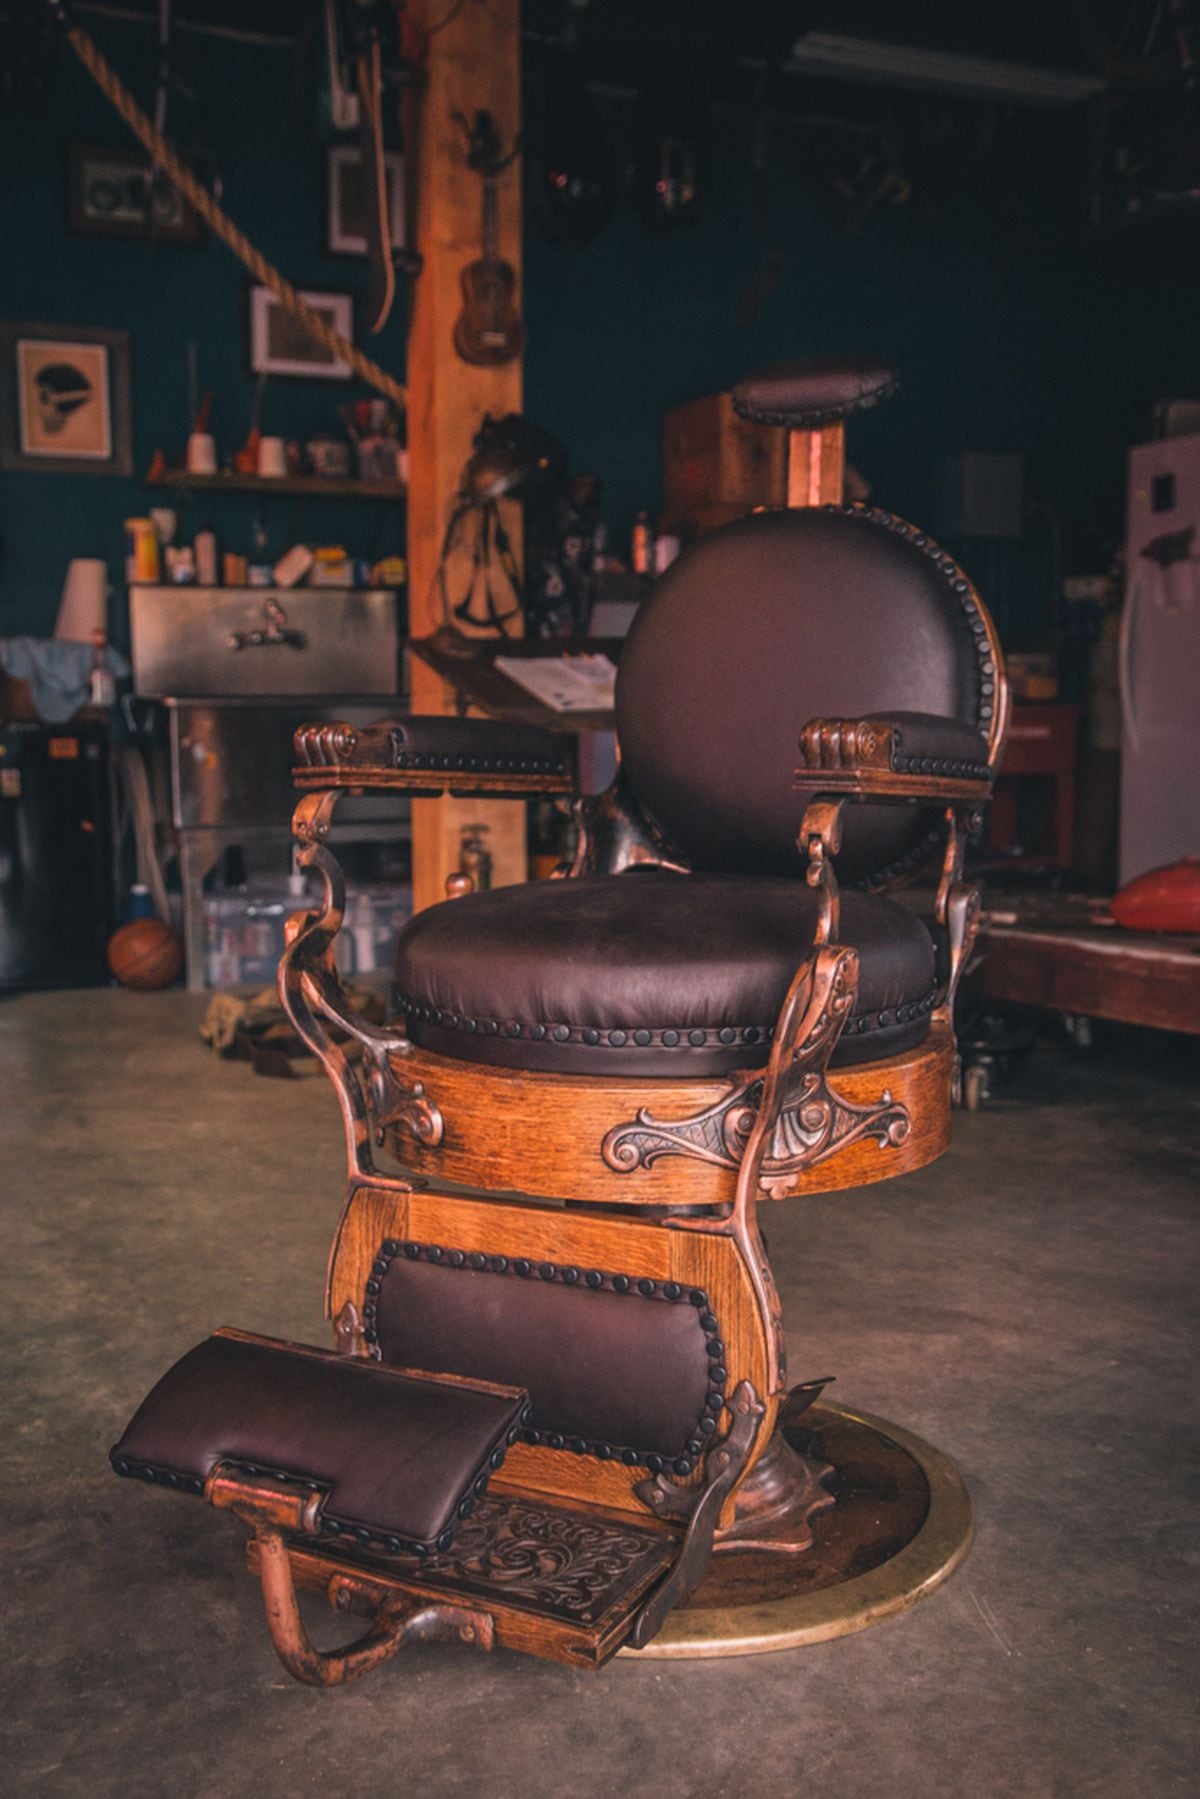 Haircut history: A barber chair from Alaska's gold rush past is